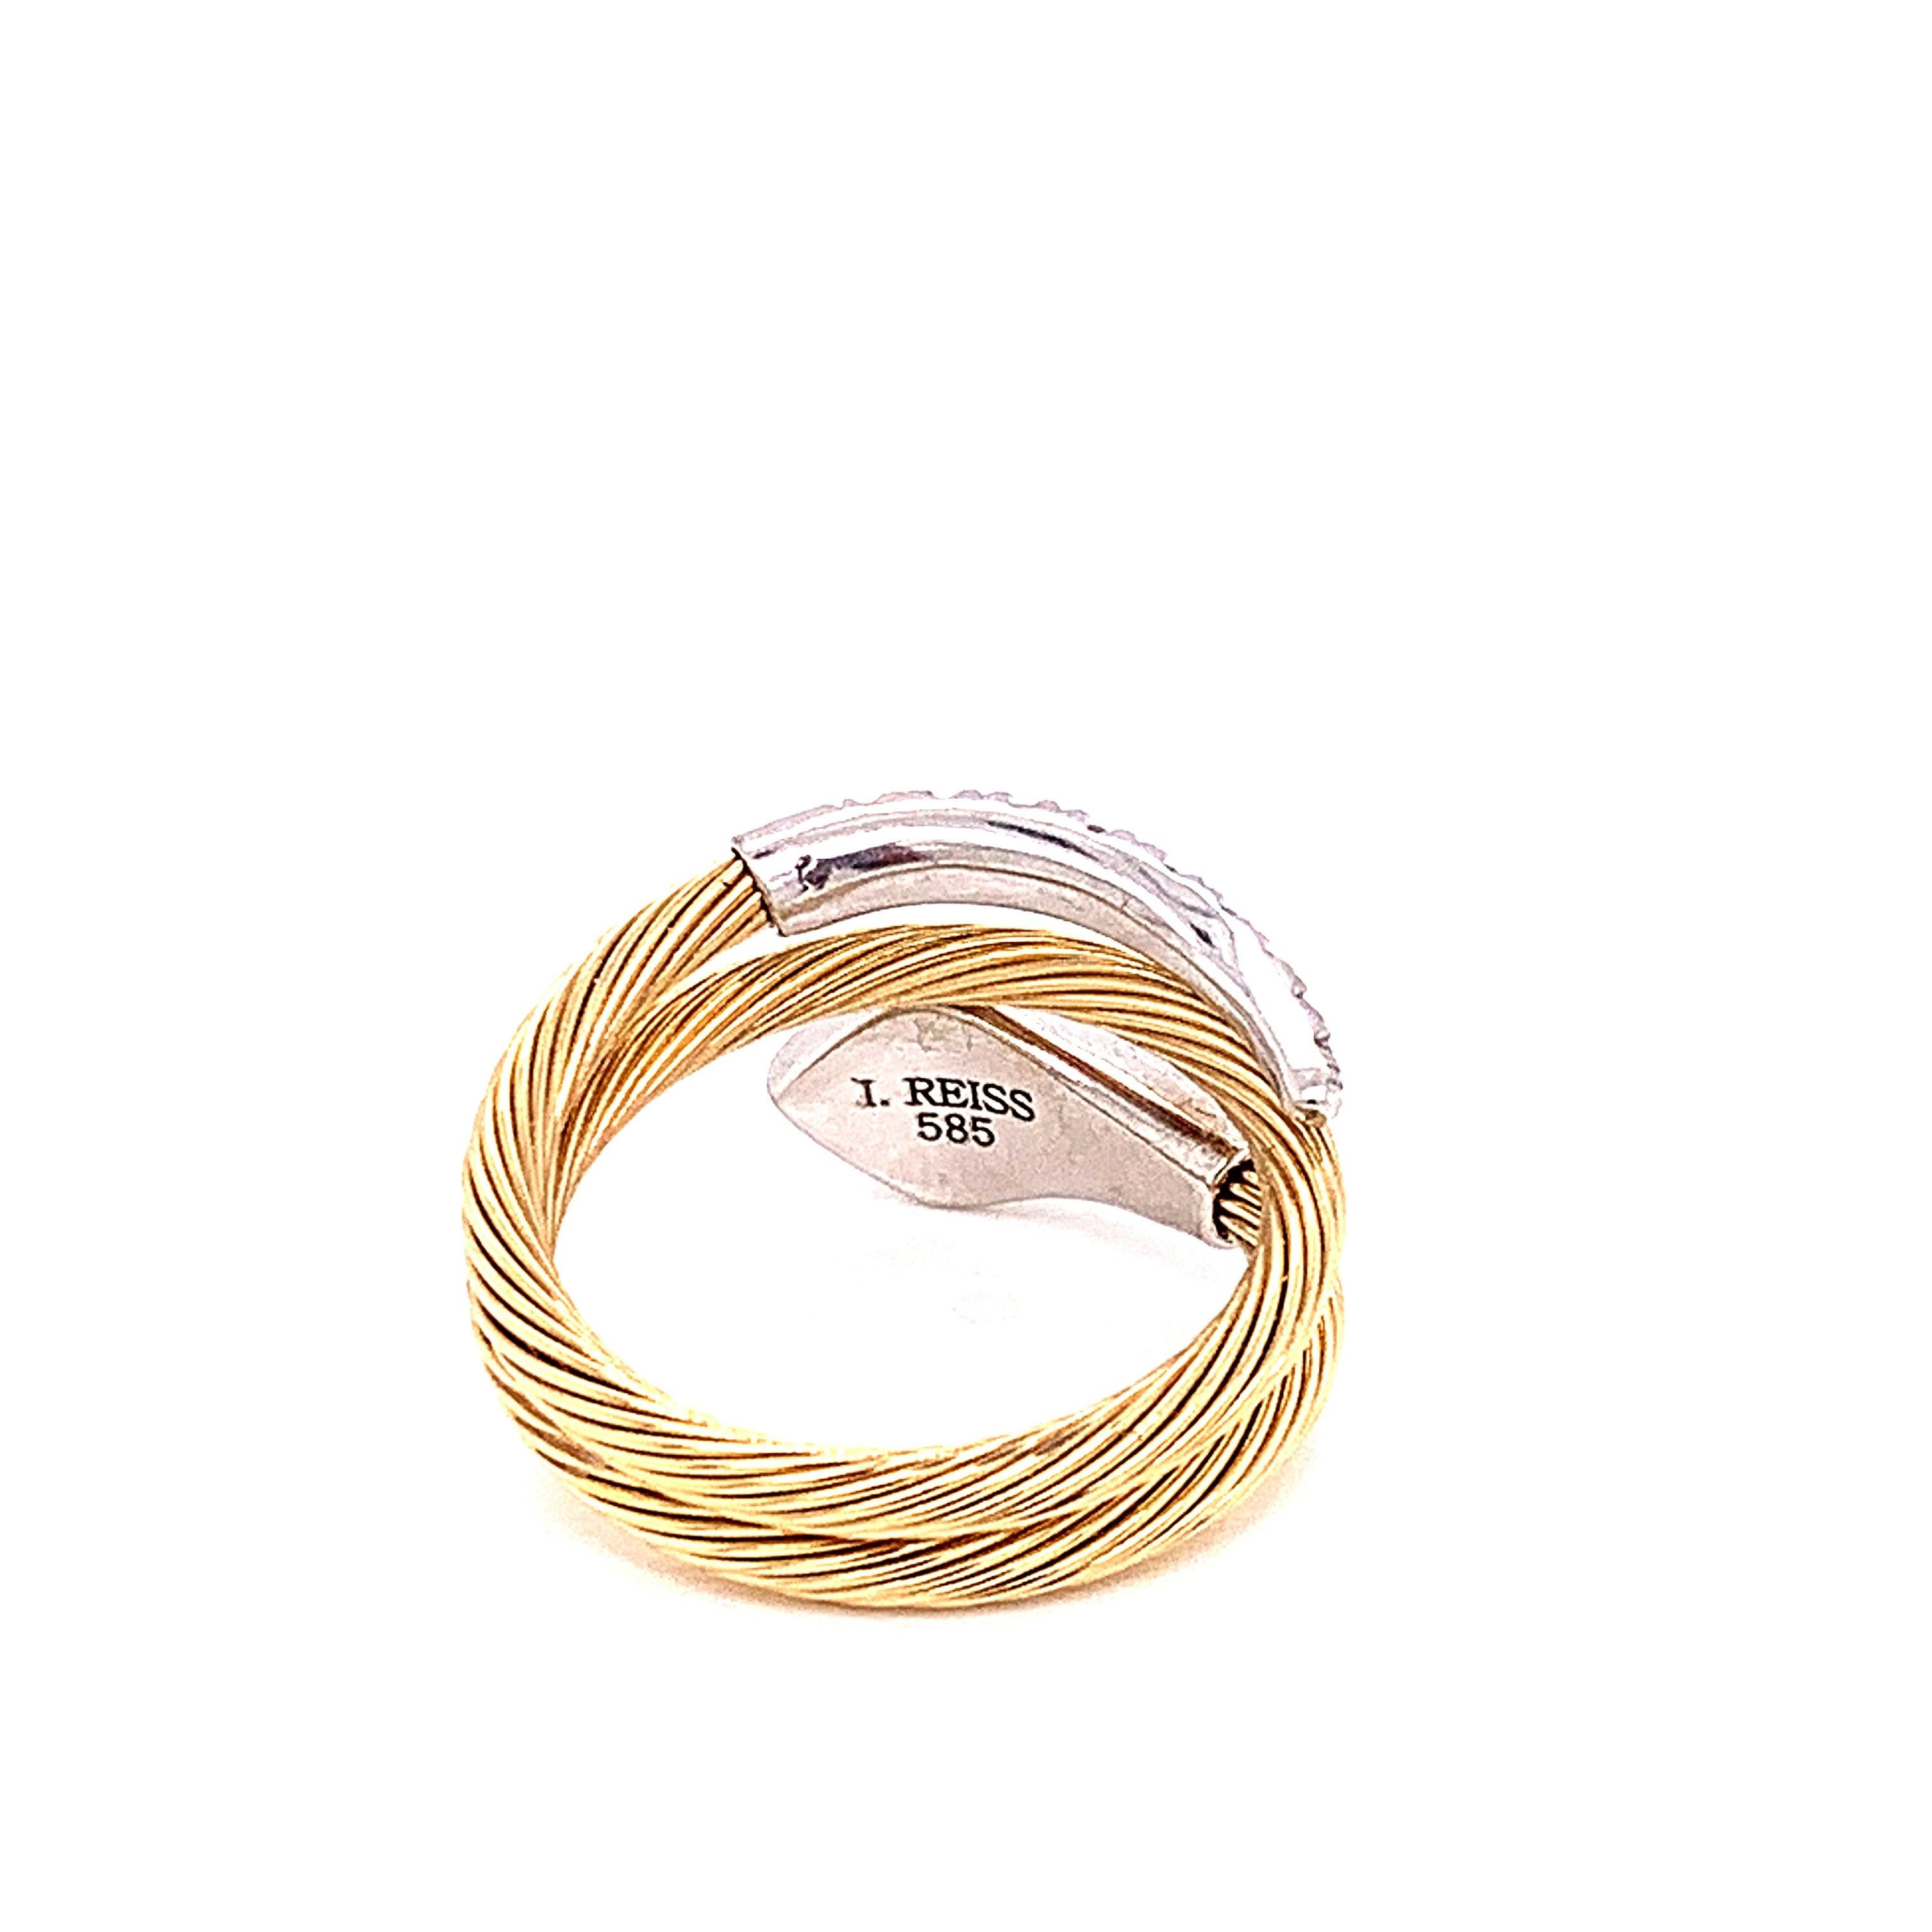 For Sale:  Handcrafted 14 Karat Yellow Gold Coil Serpent Ring 3